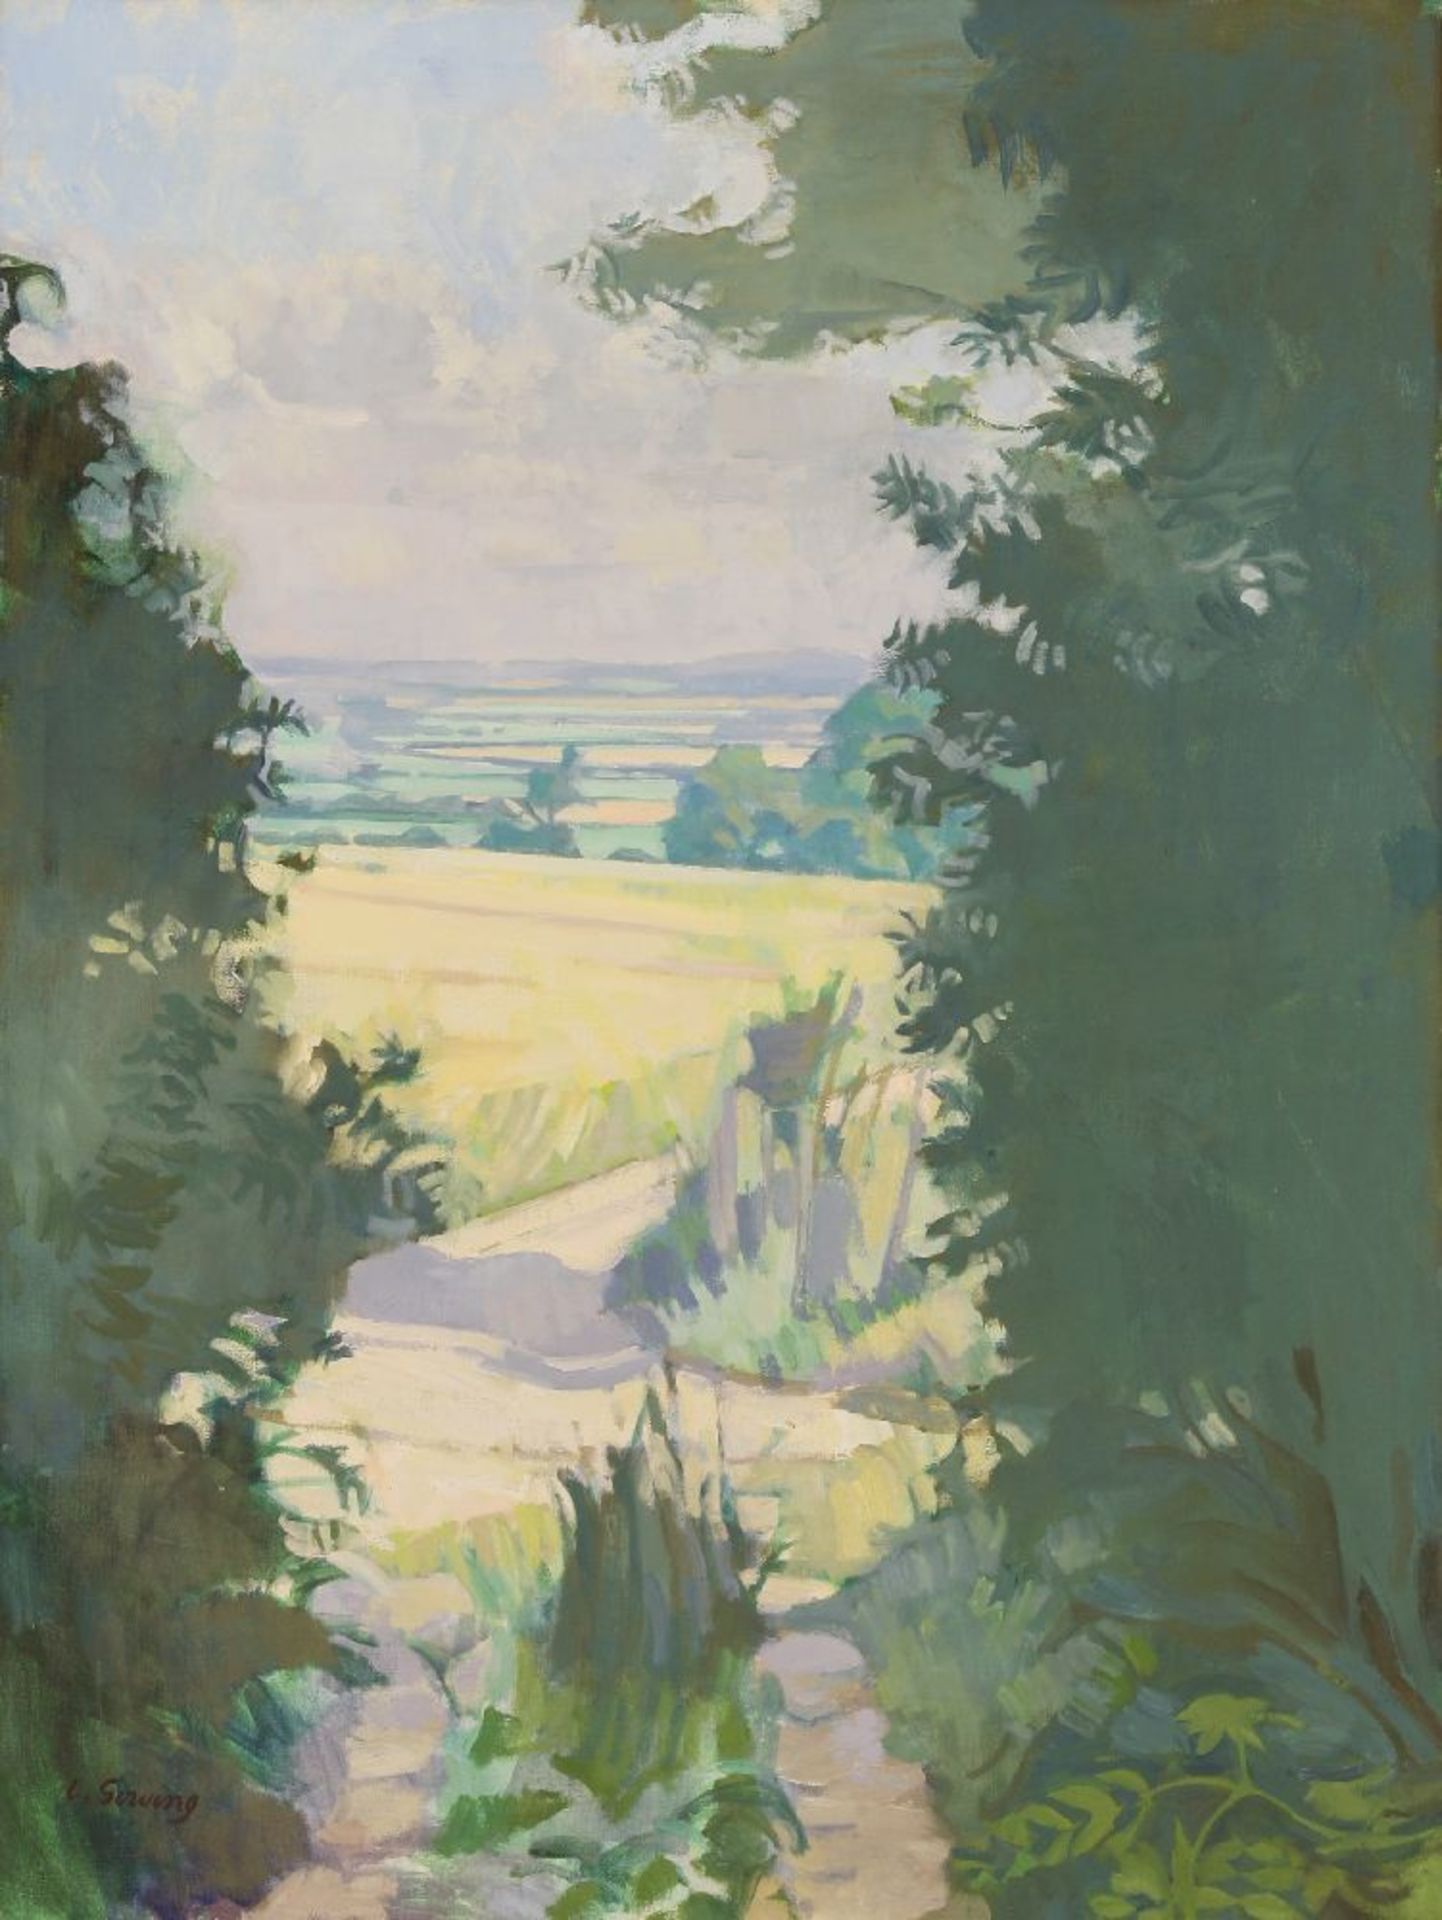 *Sir Lawrence Gowing RA (1918-1991)A SUNLIT LANDSCAPESigned l.l., oil on canvas92 x 71cm*Artist's